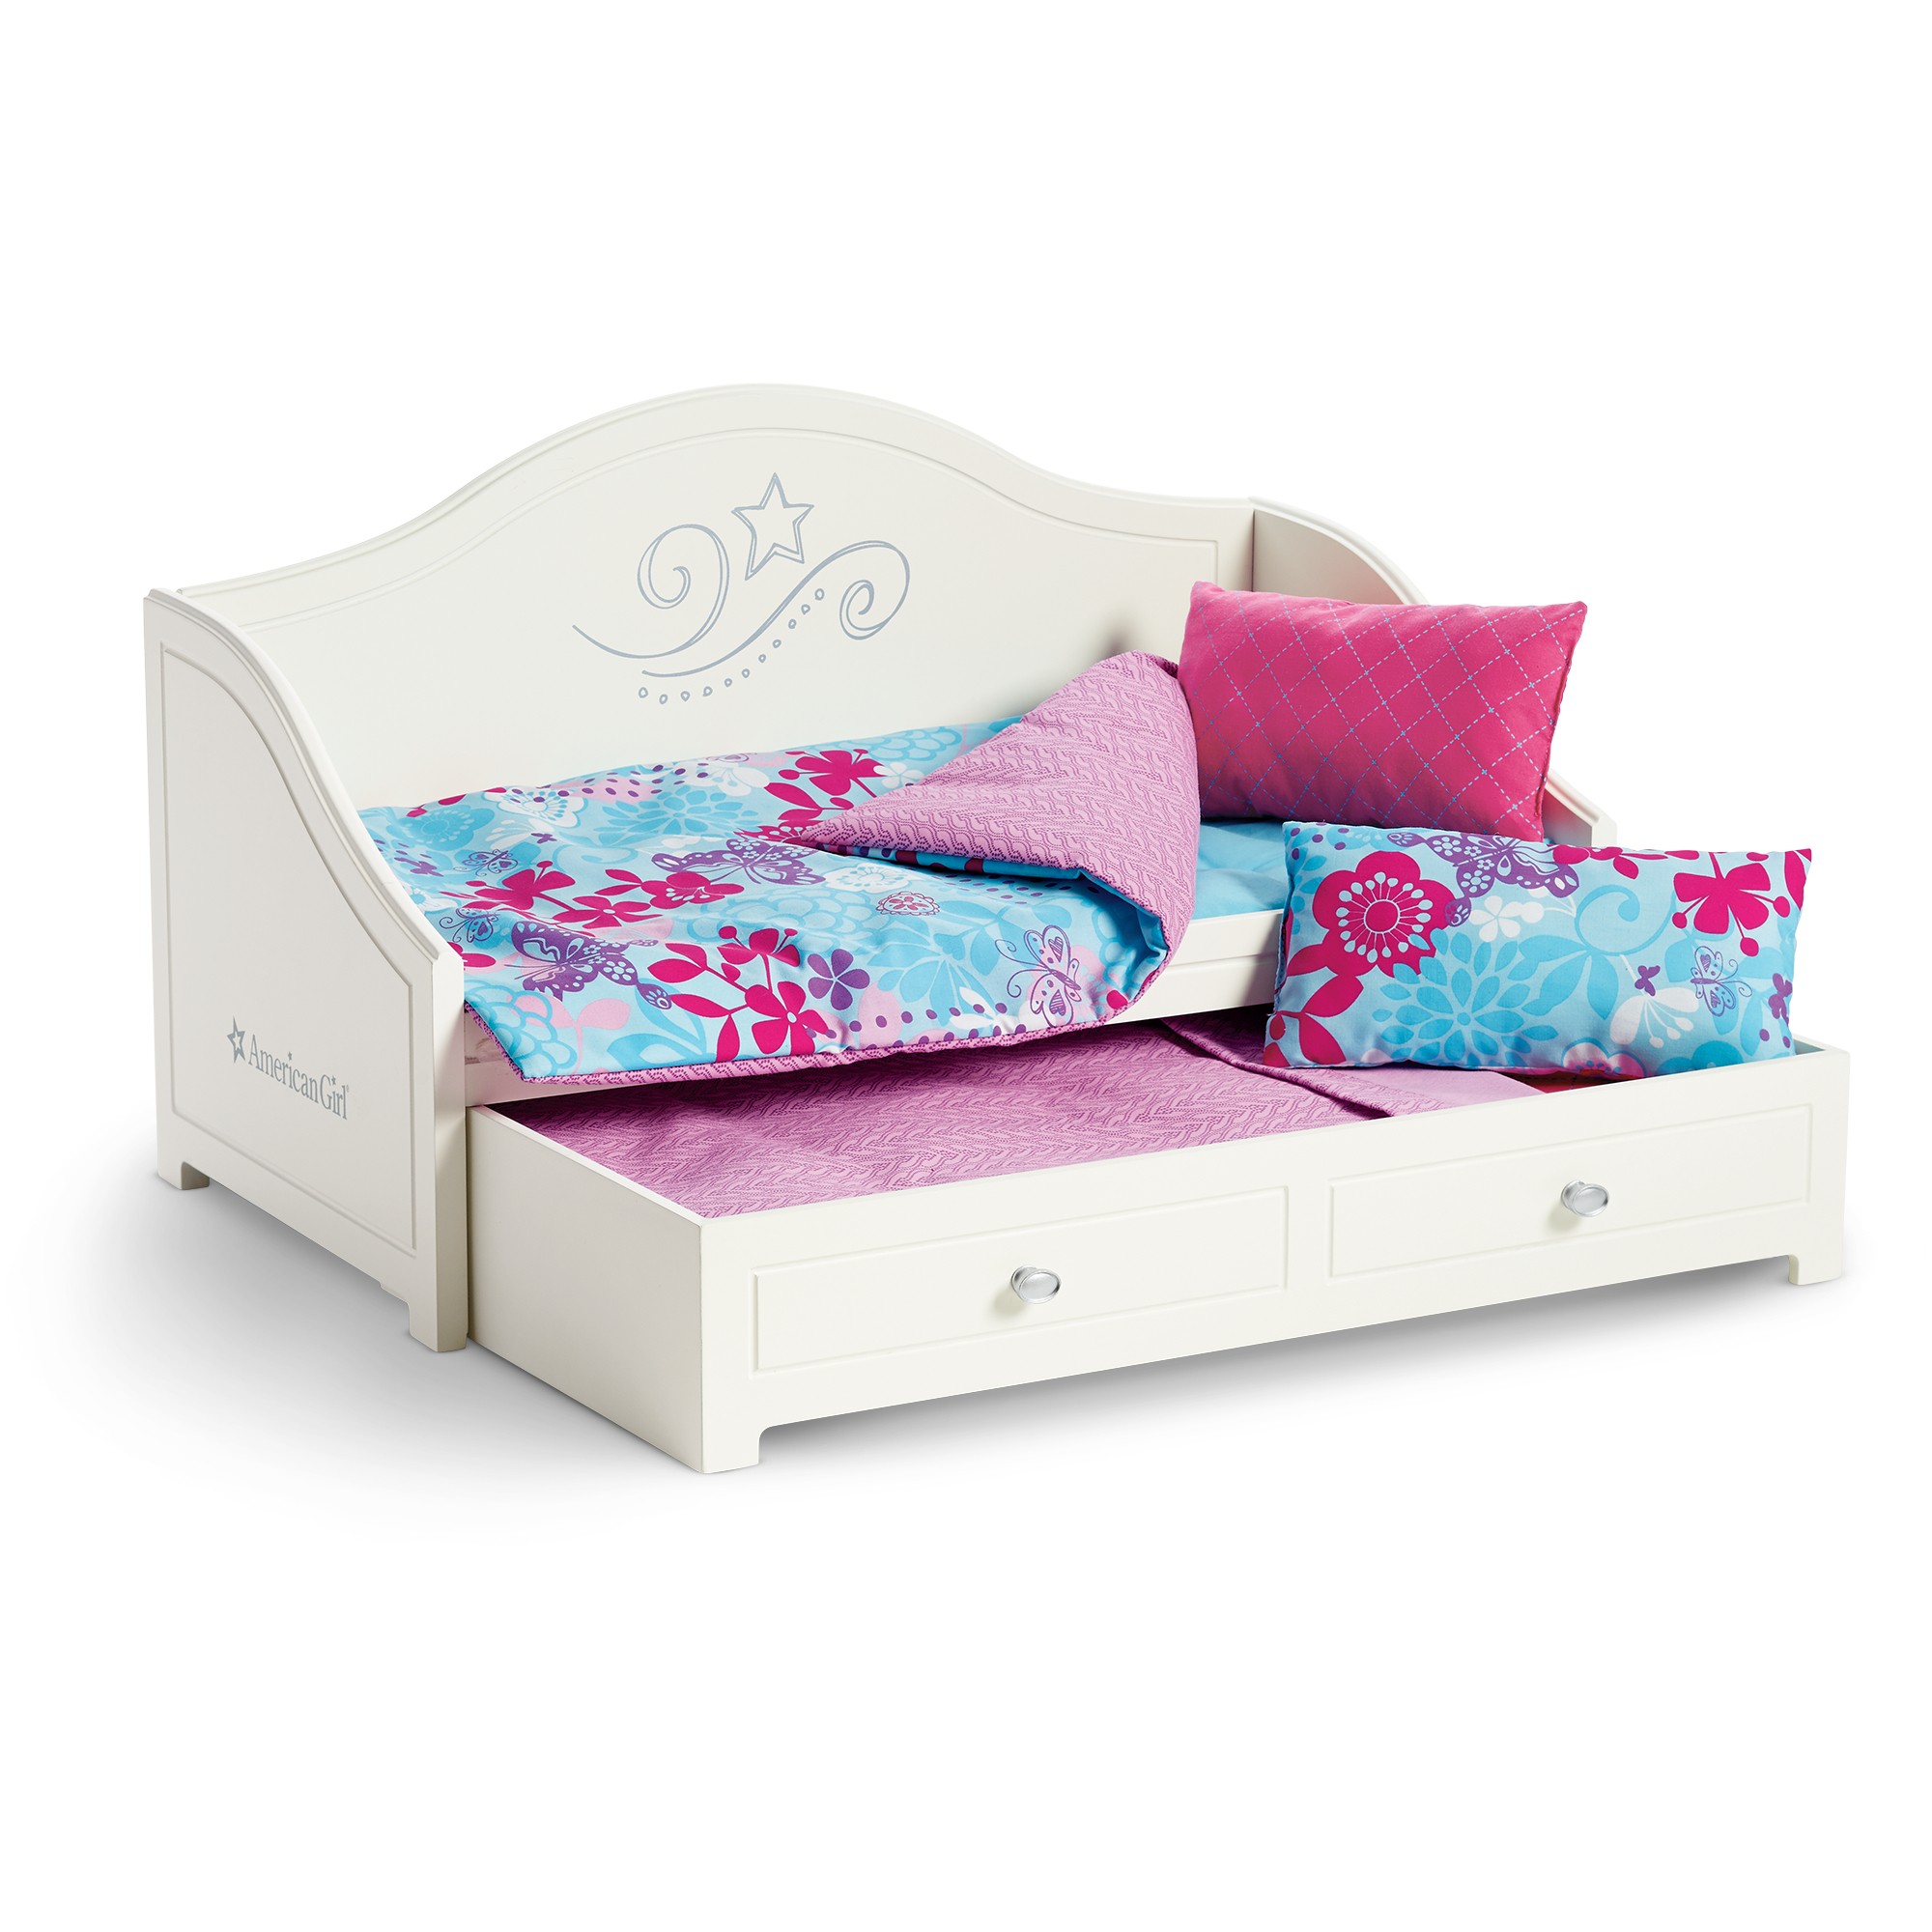 Trundle bed and bedding set american girl wiki fandom